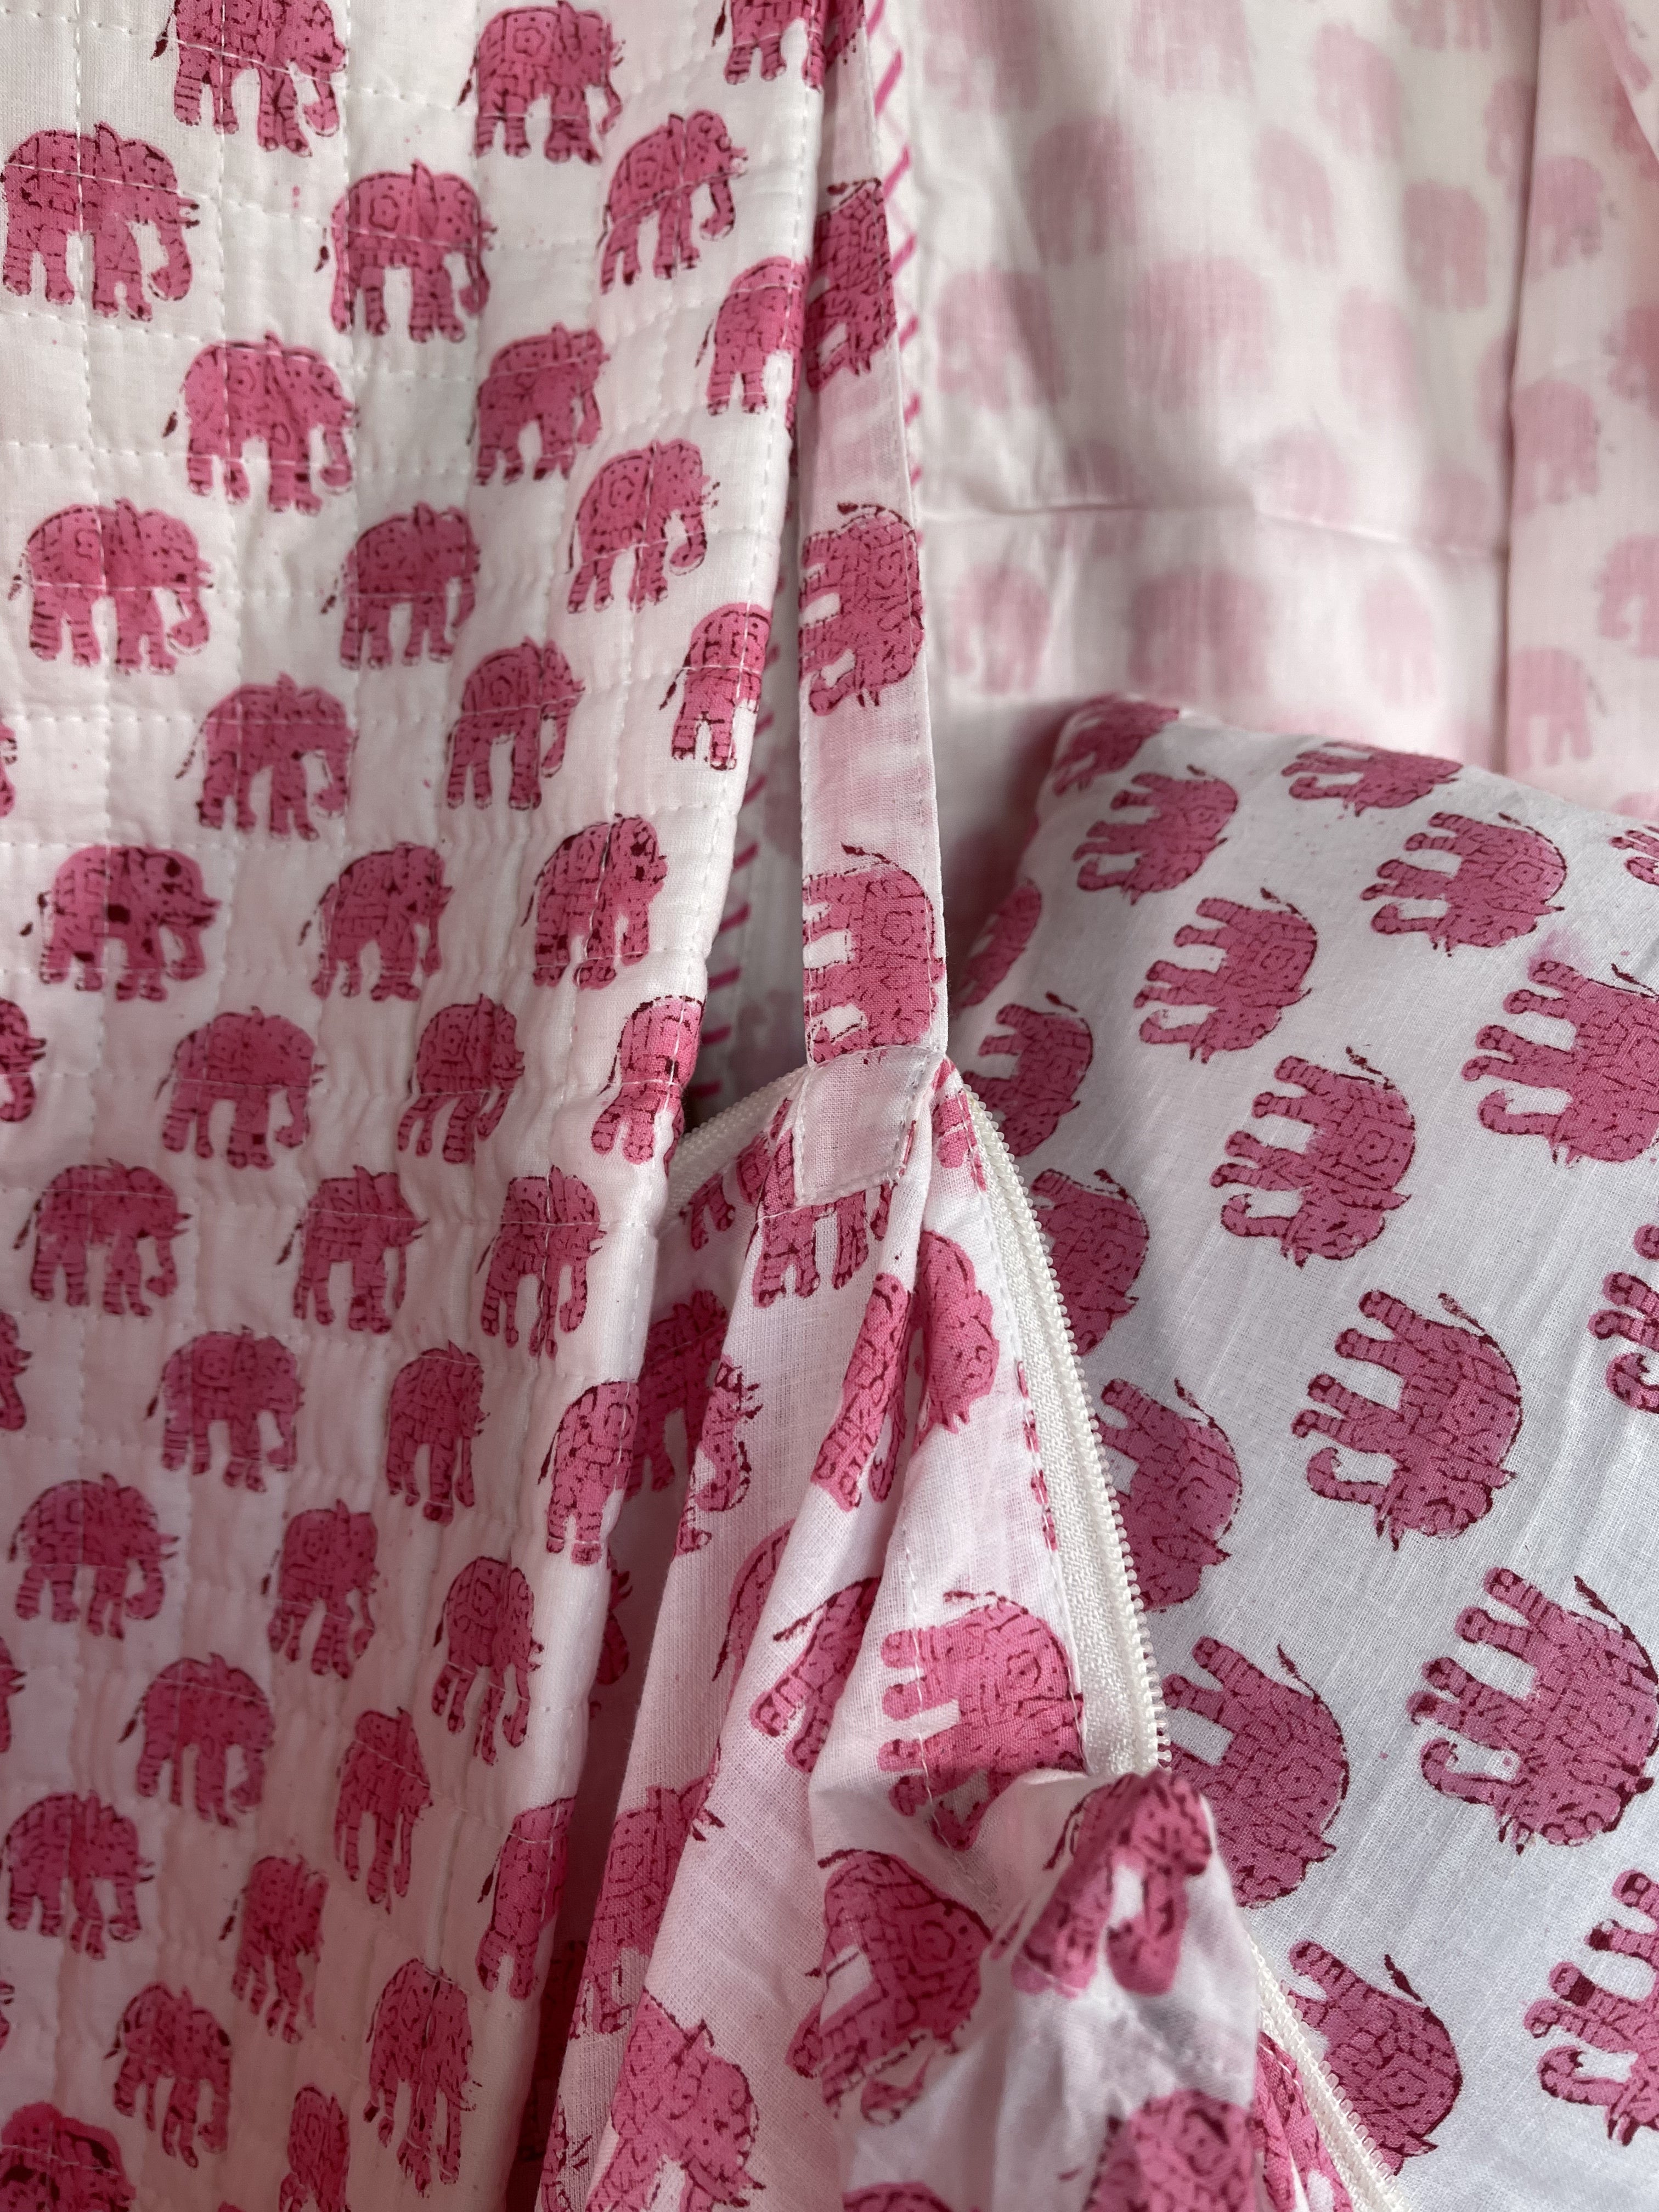 Handblock printed cotton baby quilt, machine stitched in small squares for easy care and washing. Lightly padded with cotton.